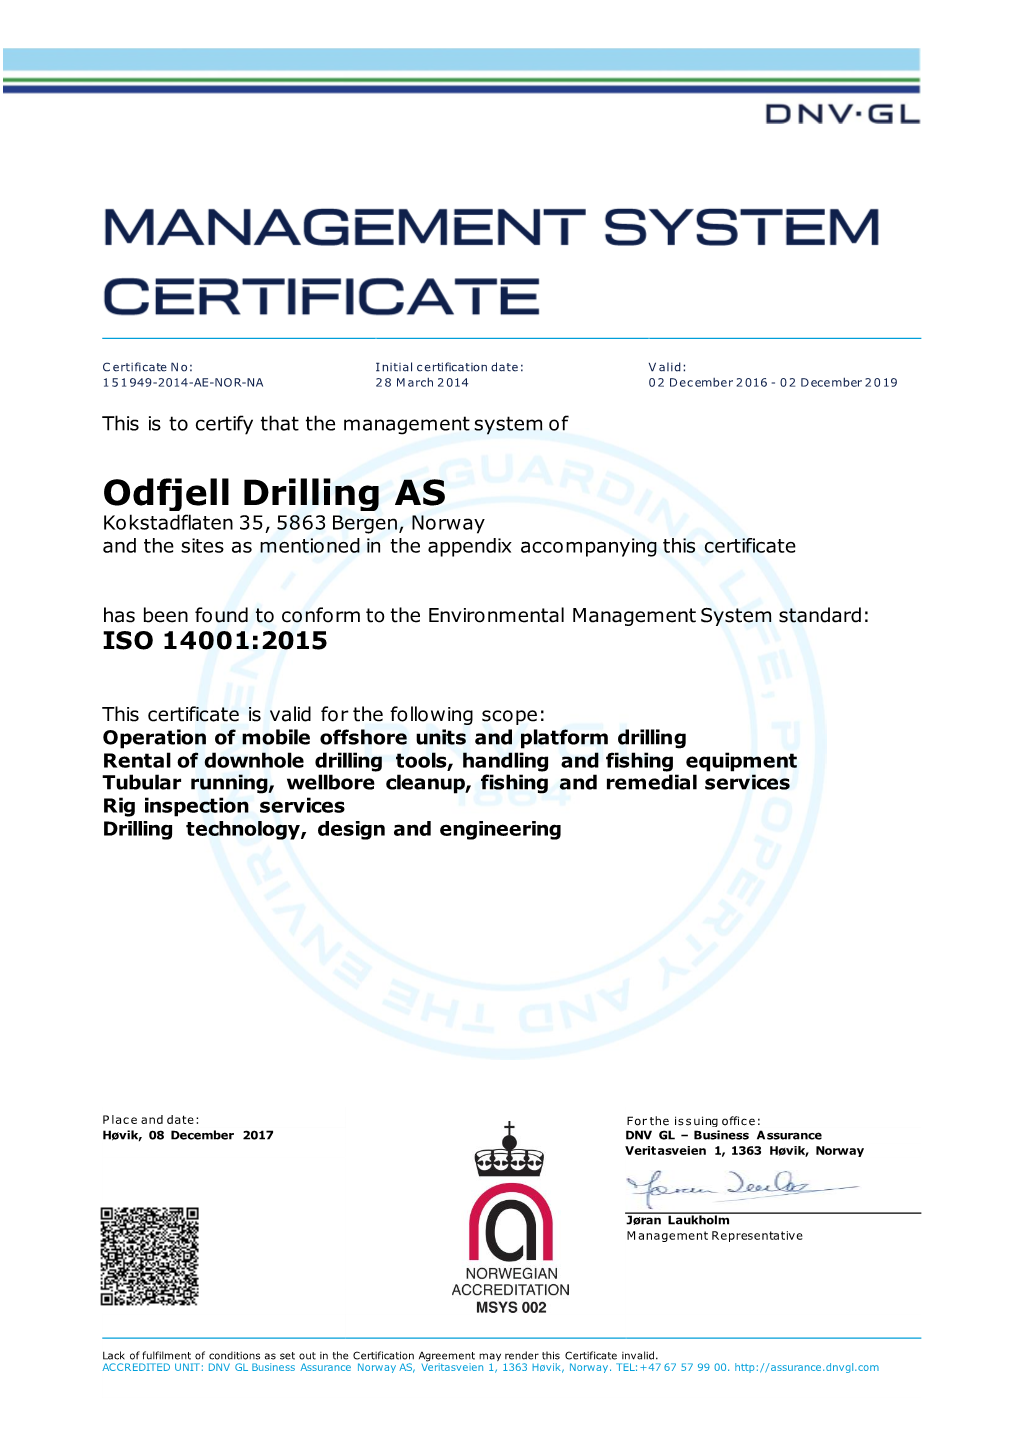 Odfjell Drilling AS Kokstadflaten 35, 5863 Bergen, Norway and the Sites As Mentioned in the Appendix Accompanying This Certificate